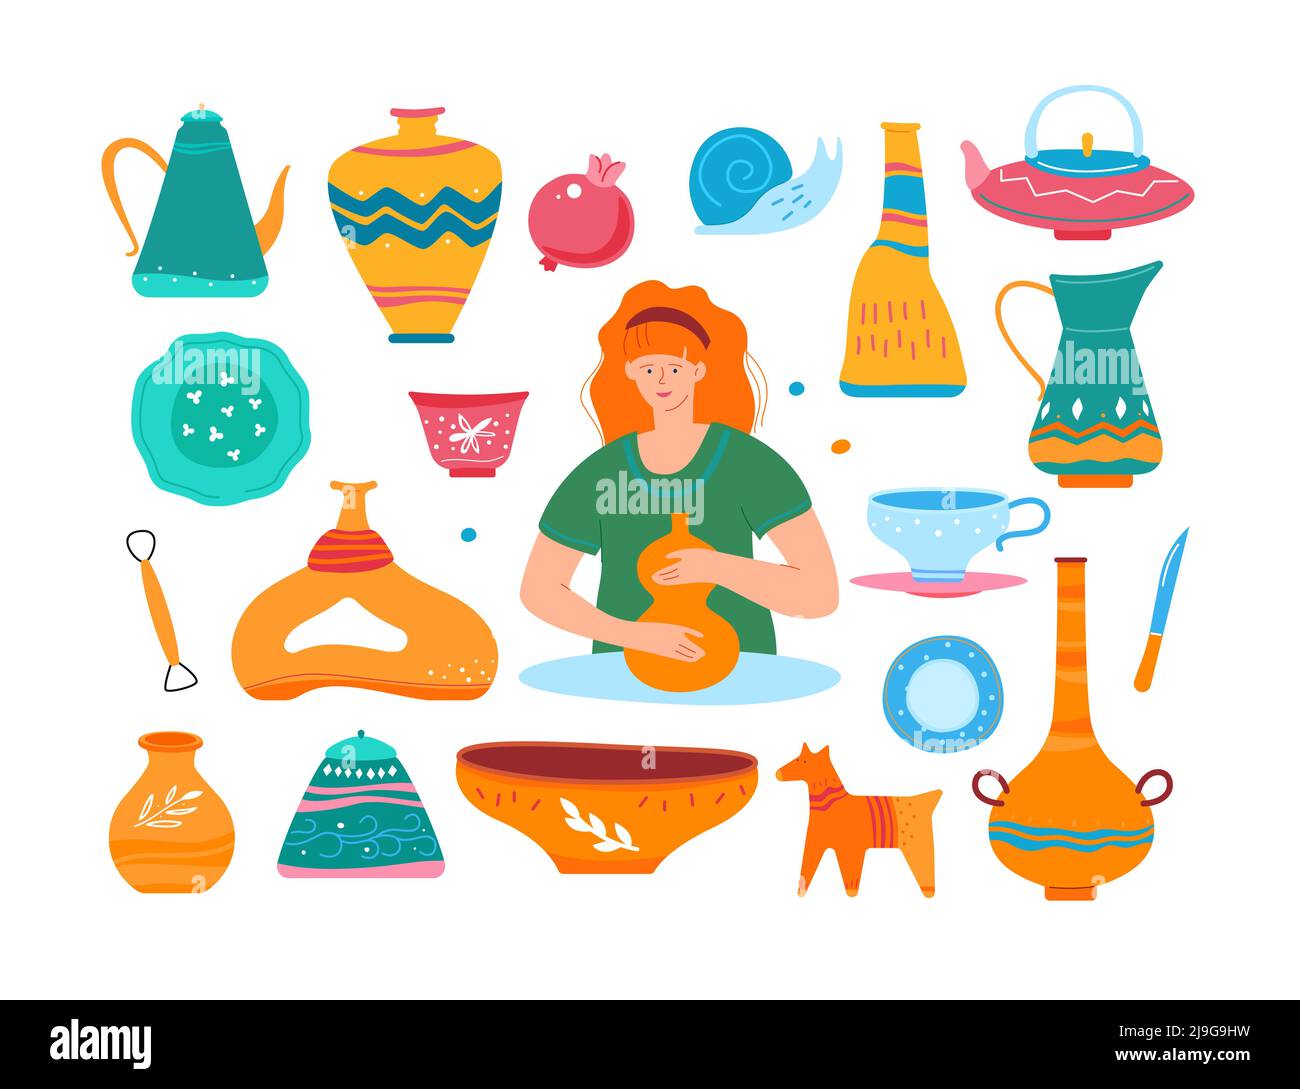 Pottery and hobby - flat design style icons set Stock Vector